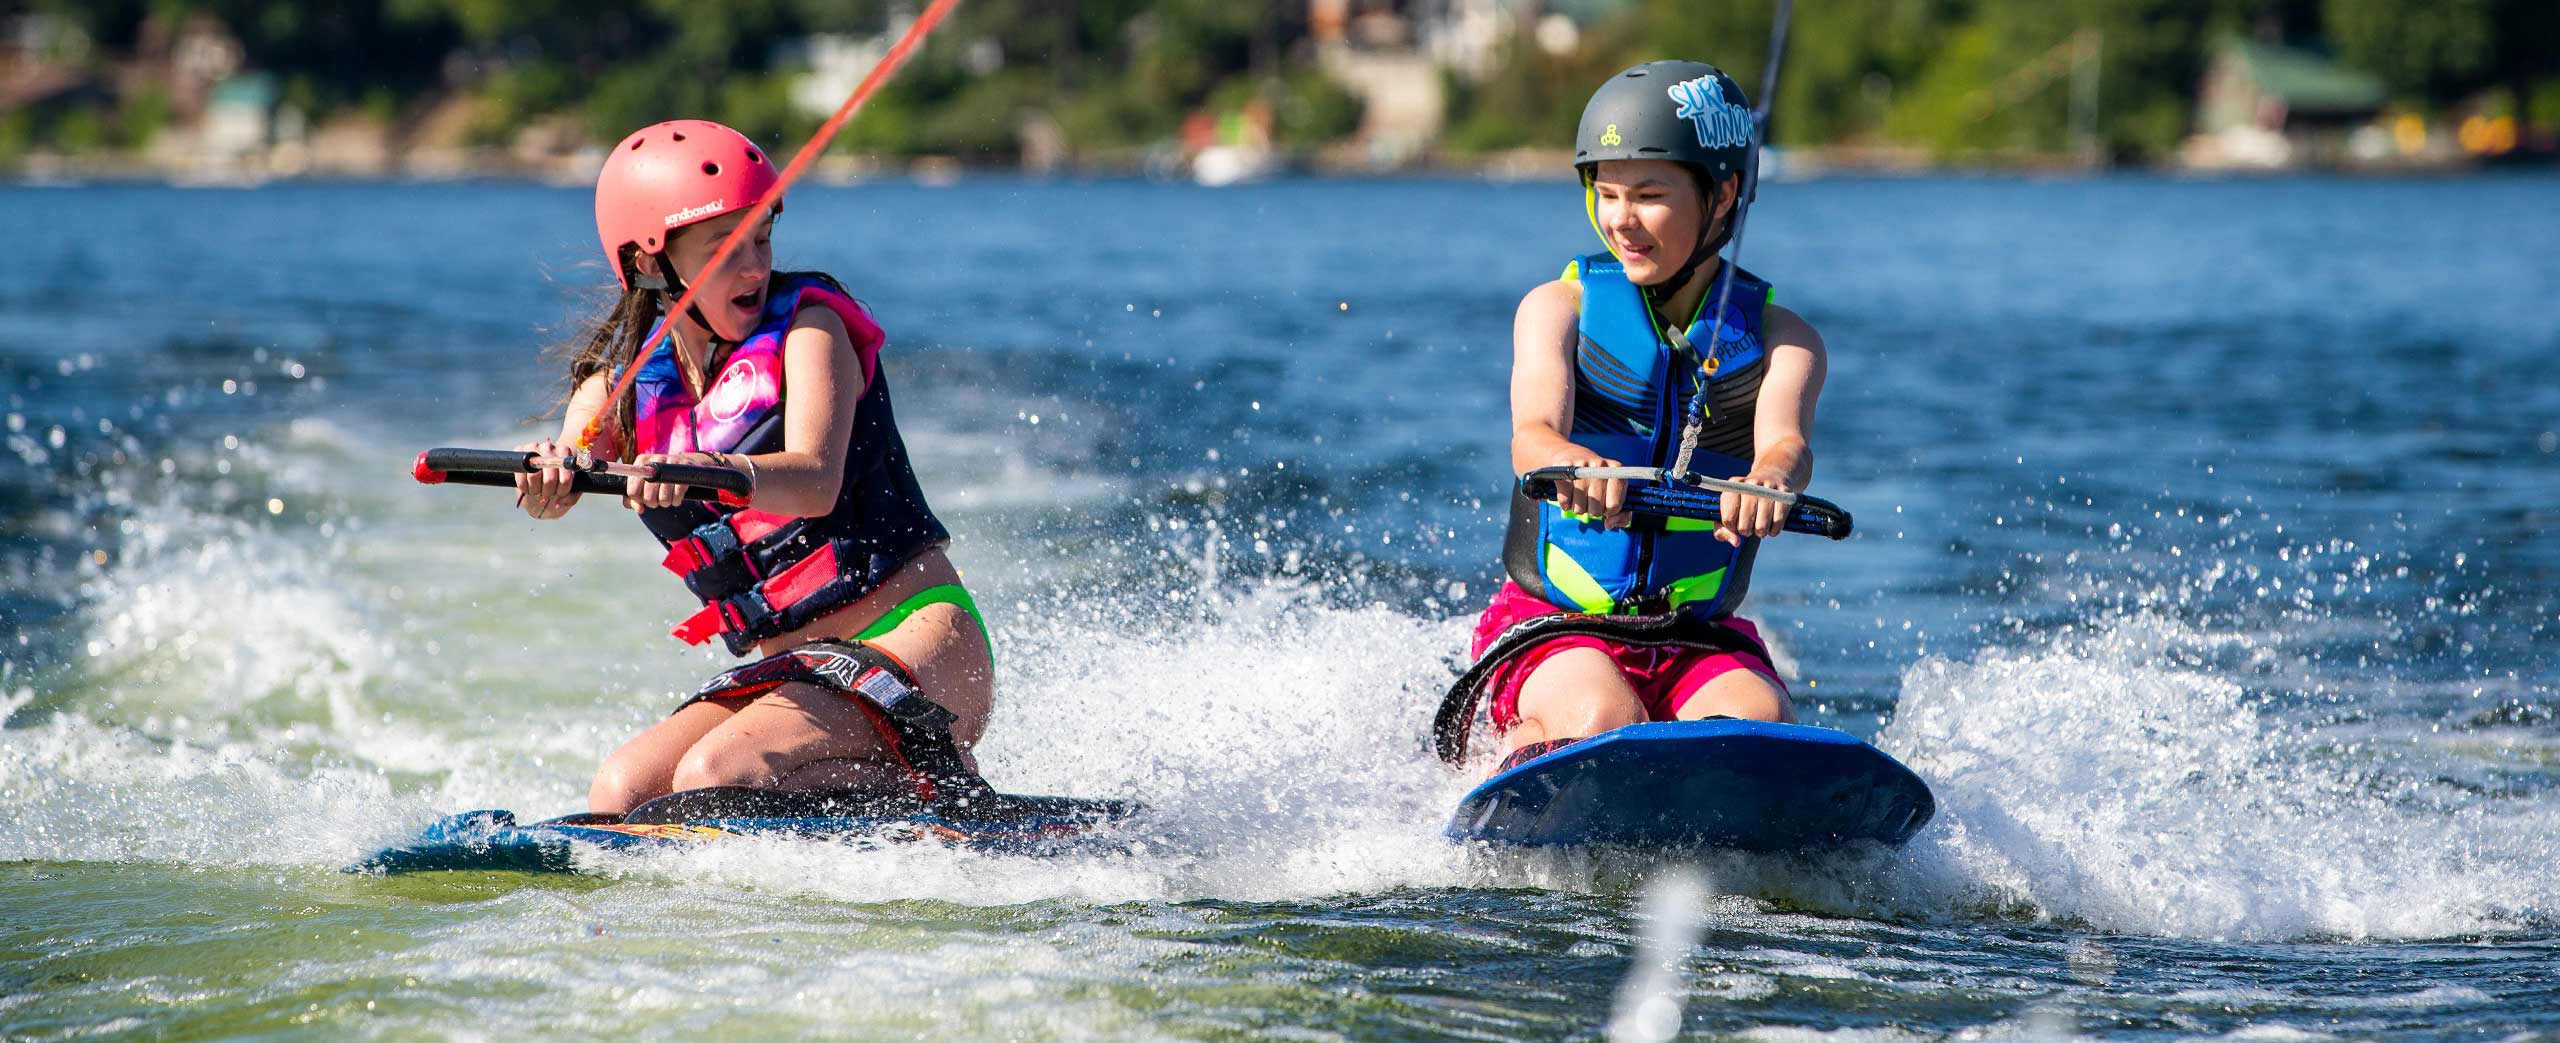 Twinlow Camp Advanced Middle School Watersports Hero